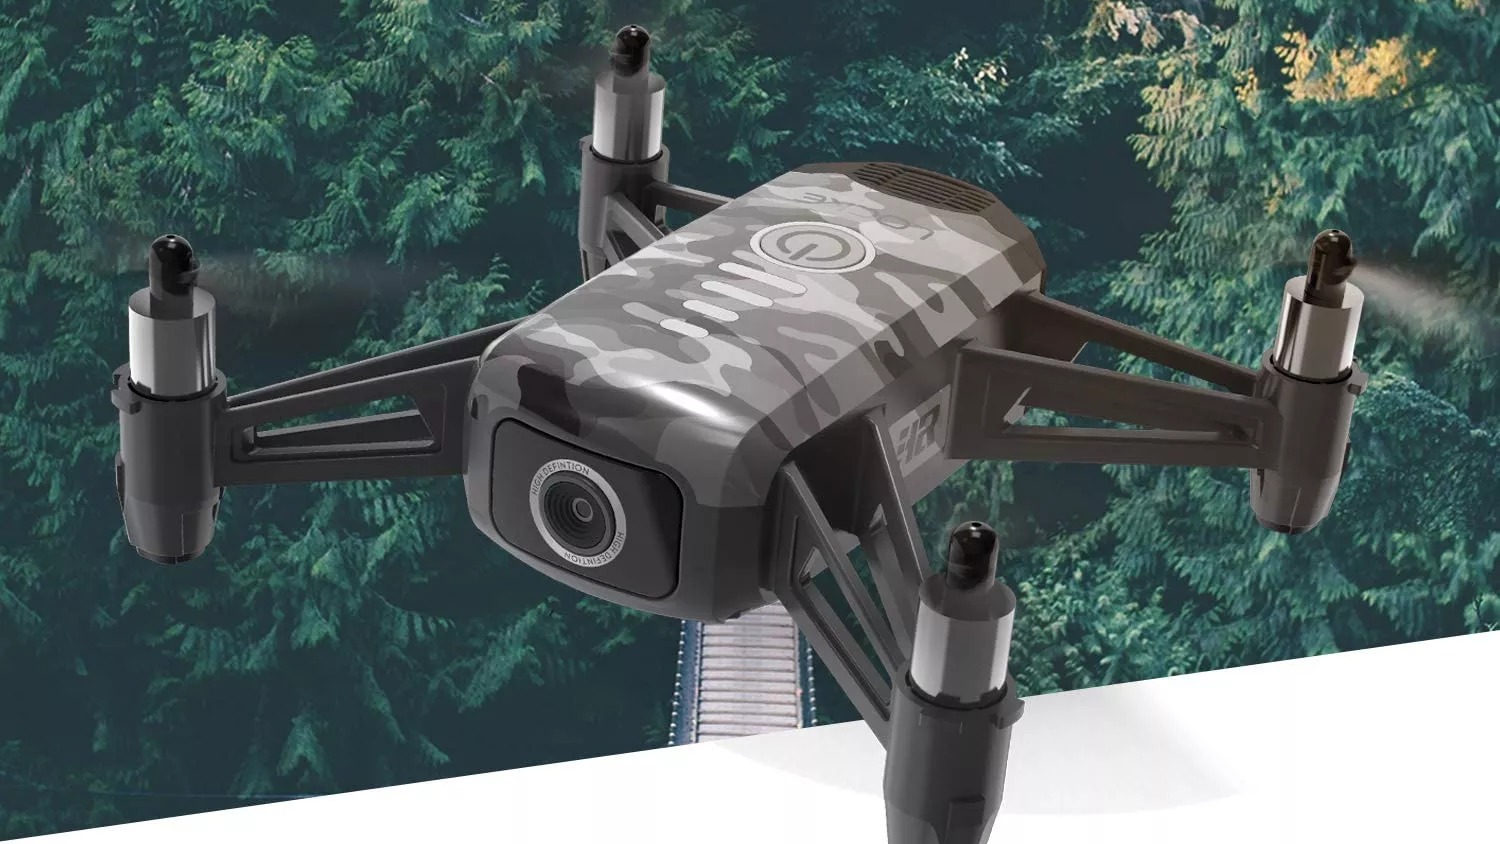 Gift this HR Drone for kids that soars at 72% off this Cyber Monday